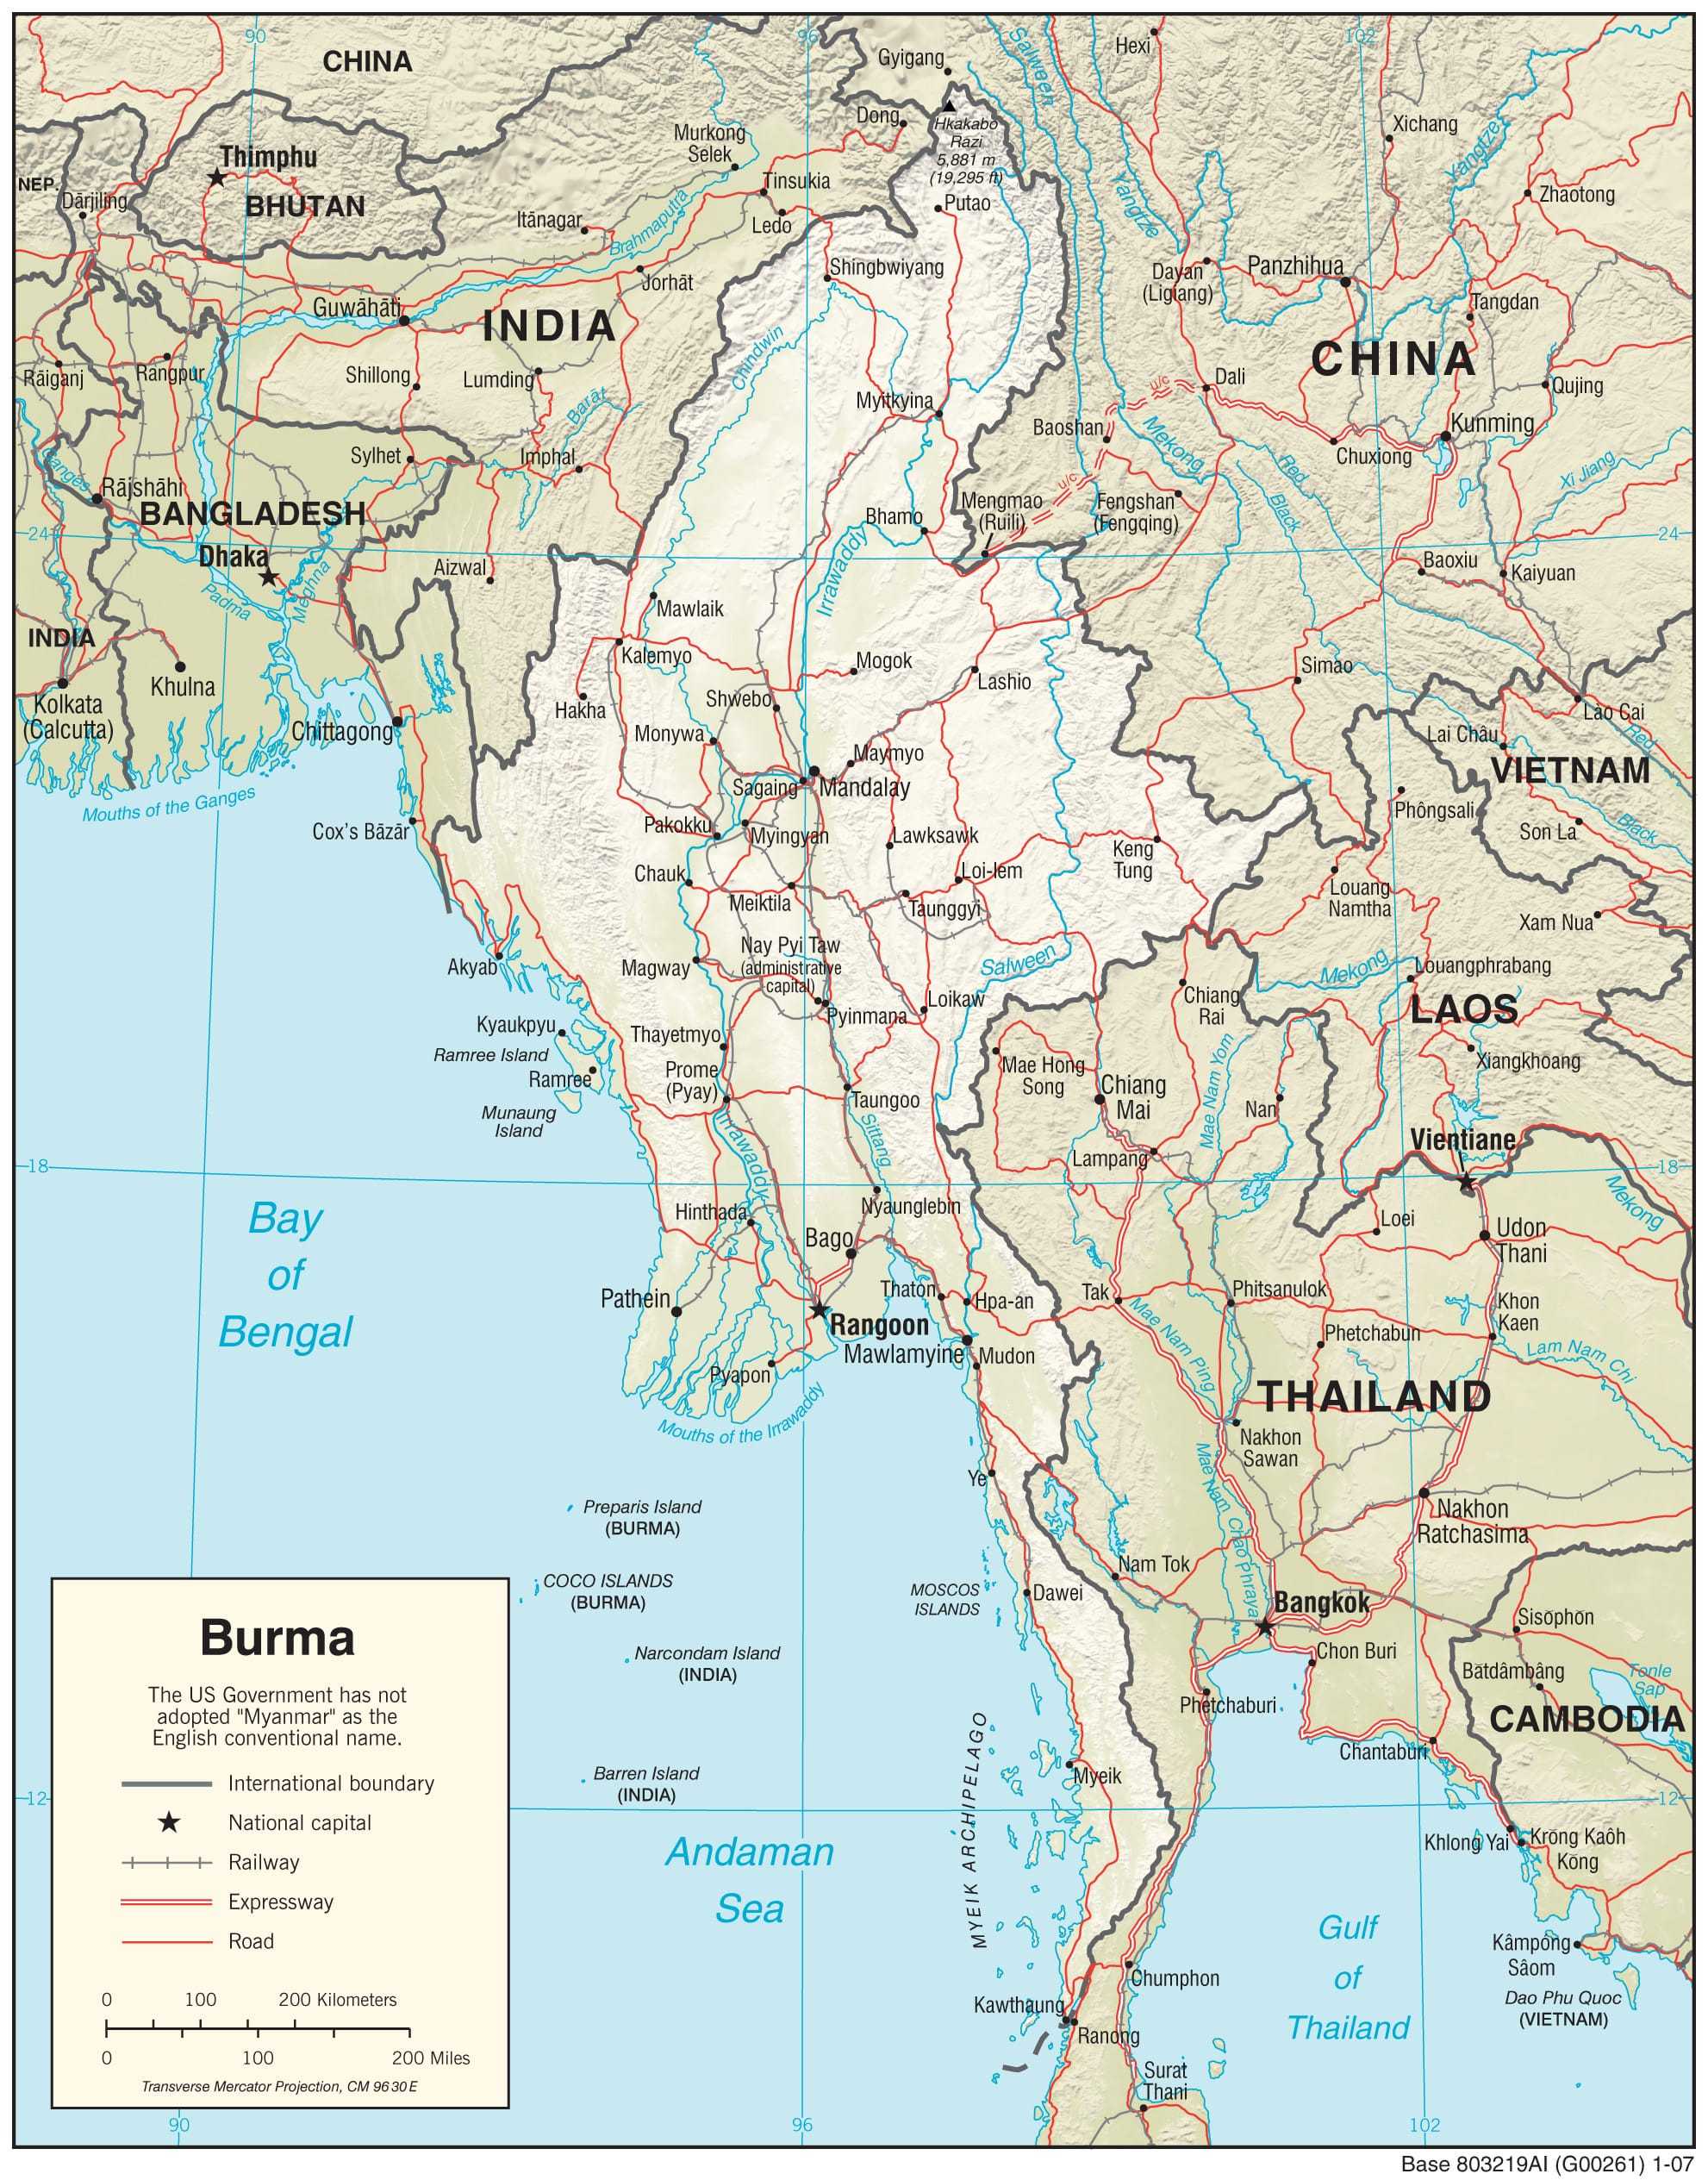 Physiographical map of Burma.